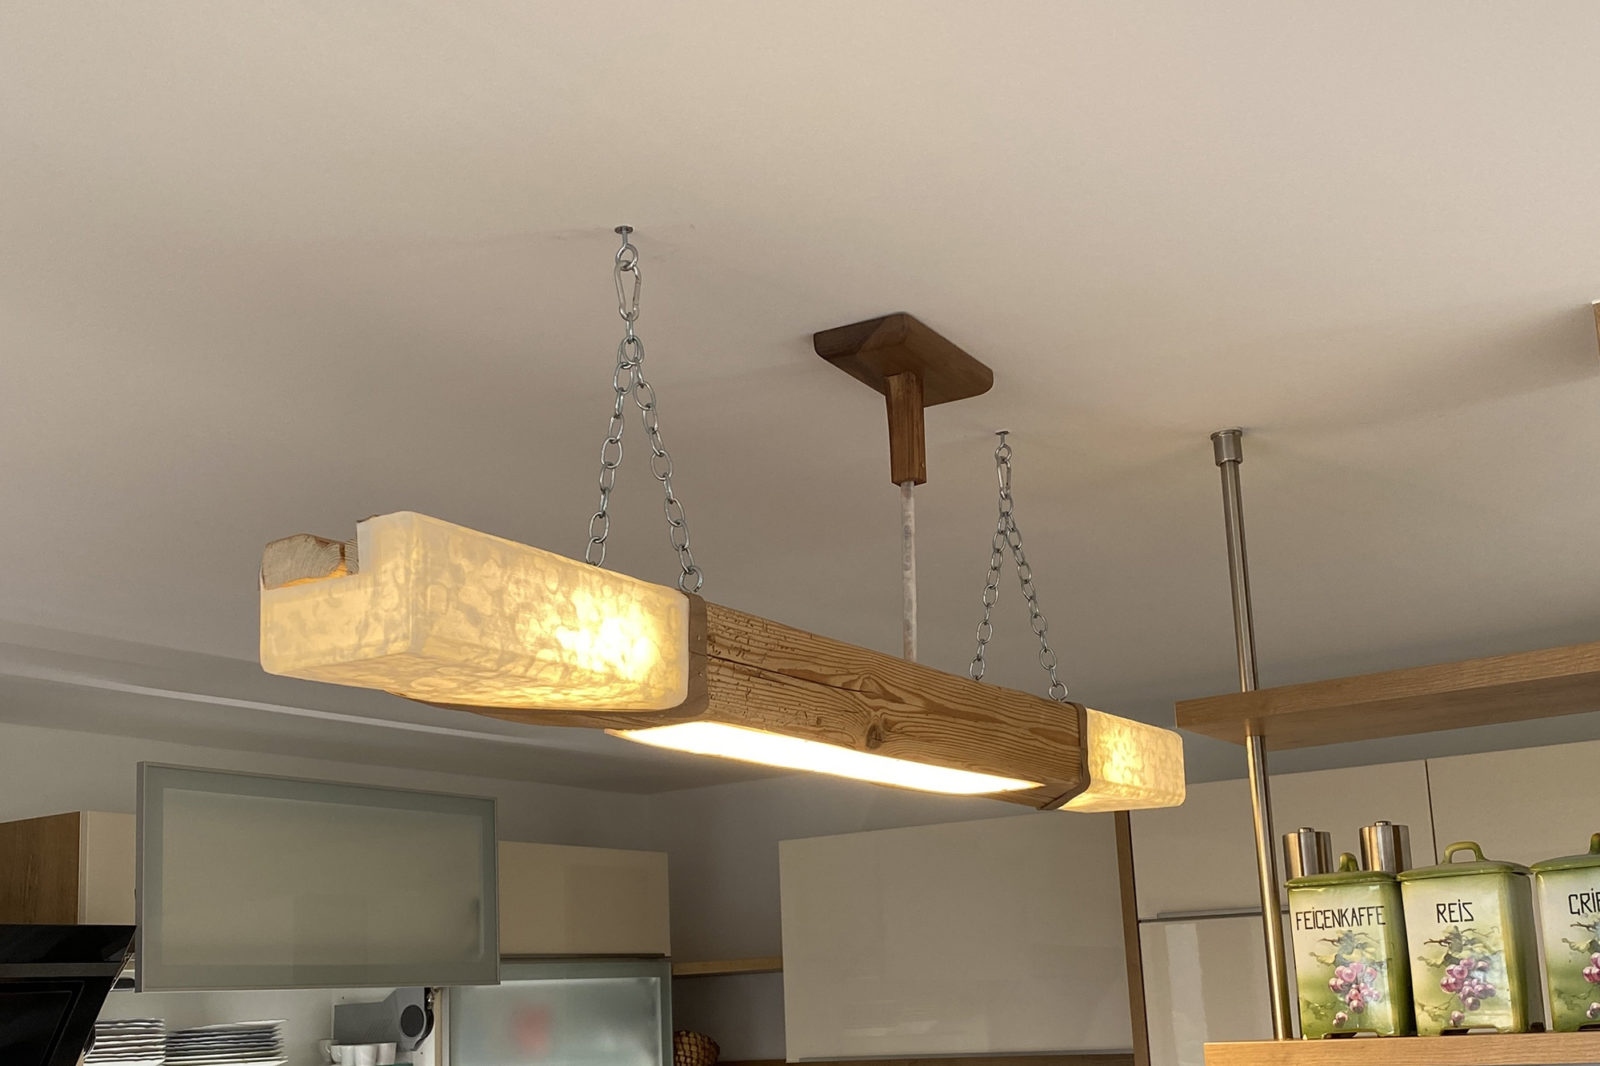 An Old Piece of Wood Turned Into a Lamp